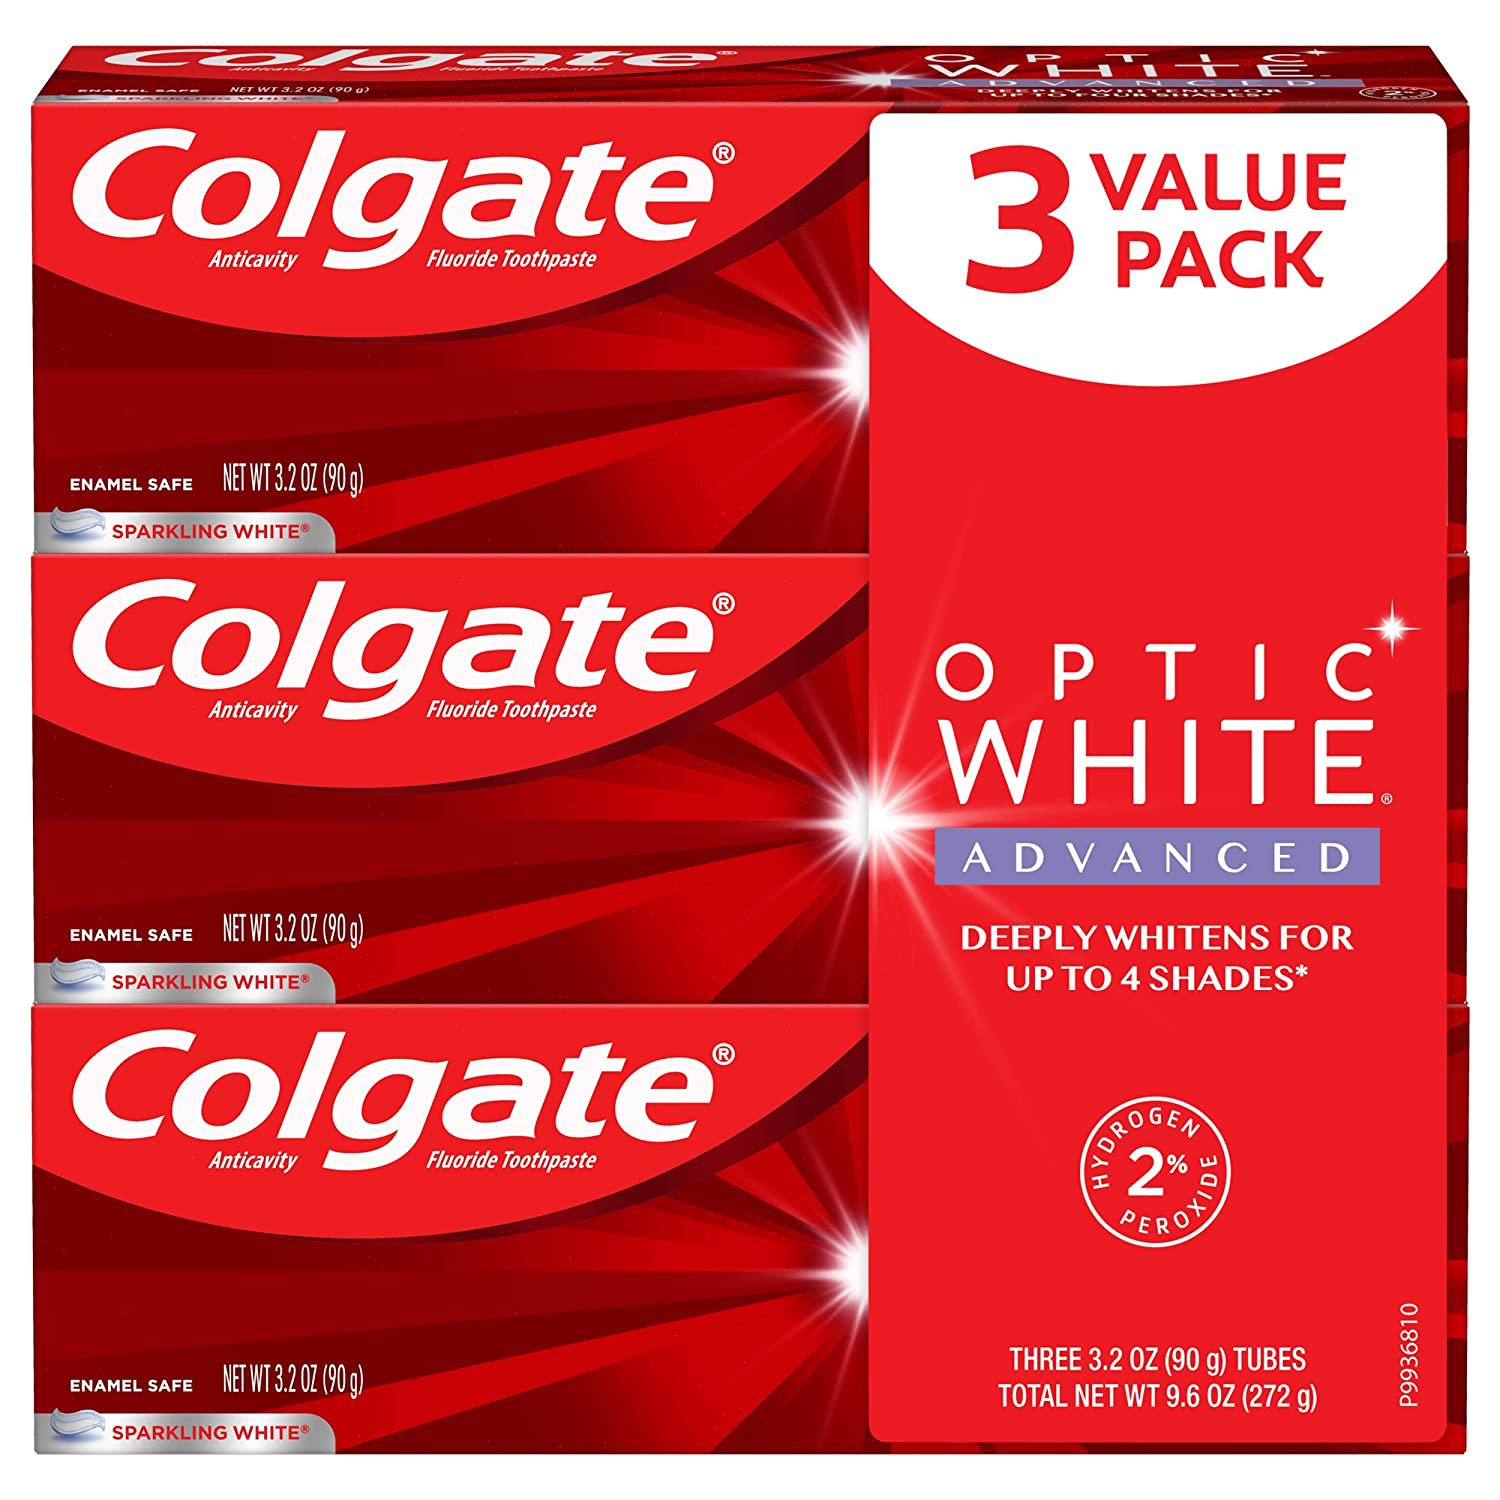 Colgate Optic White Overnight Teeth Whitening Pen, Teeth Stain Remover to Whiten Teeth or Toothpaste